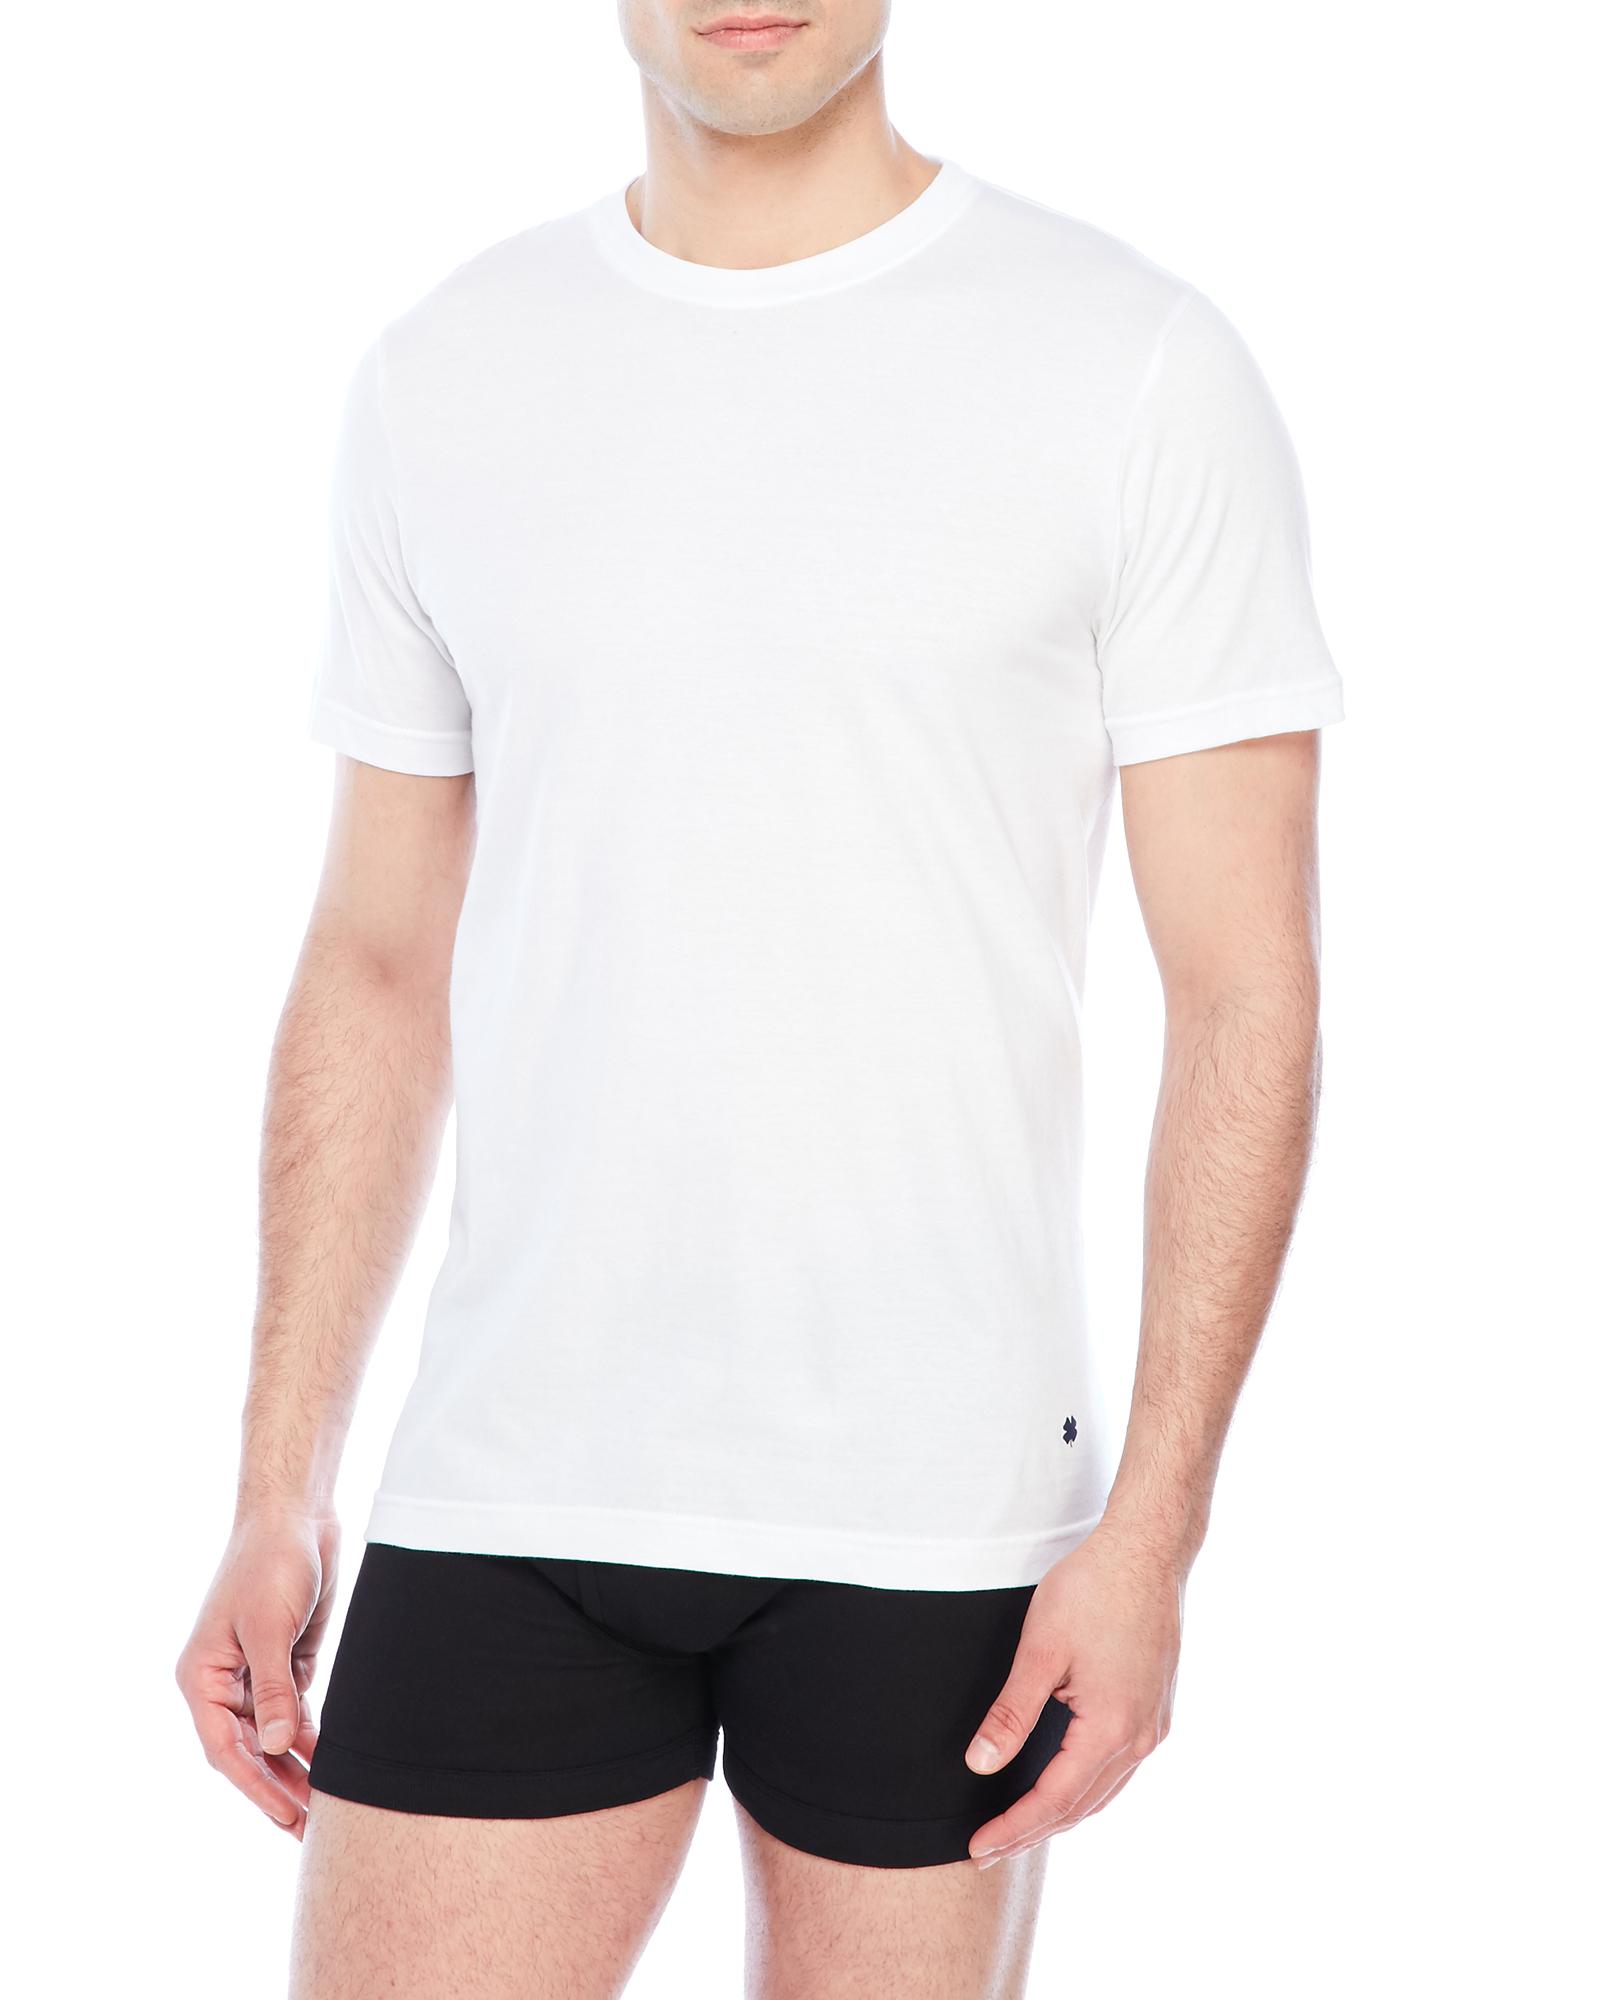 Lucky Brand Cotton 3 Pack Tee Shirts in White for Men - Lyst